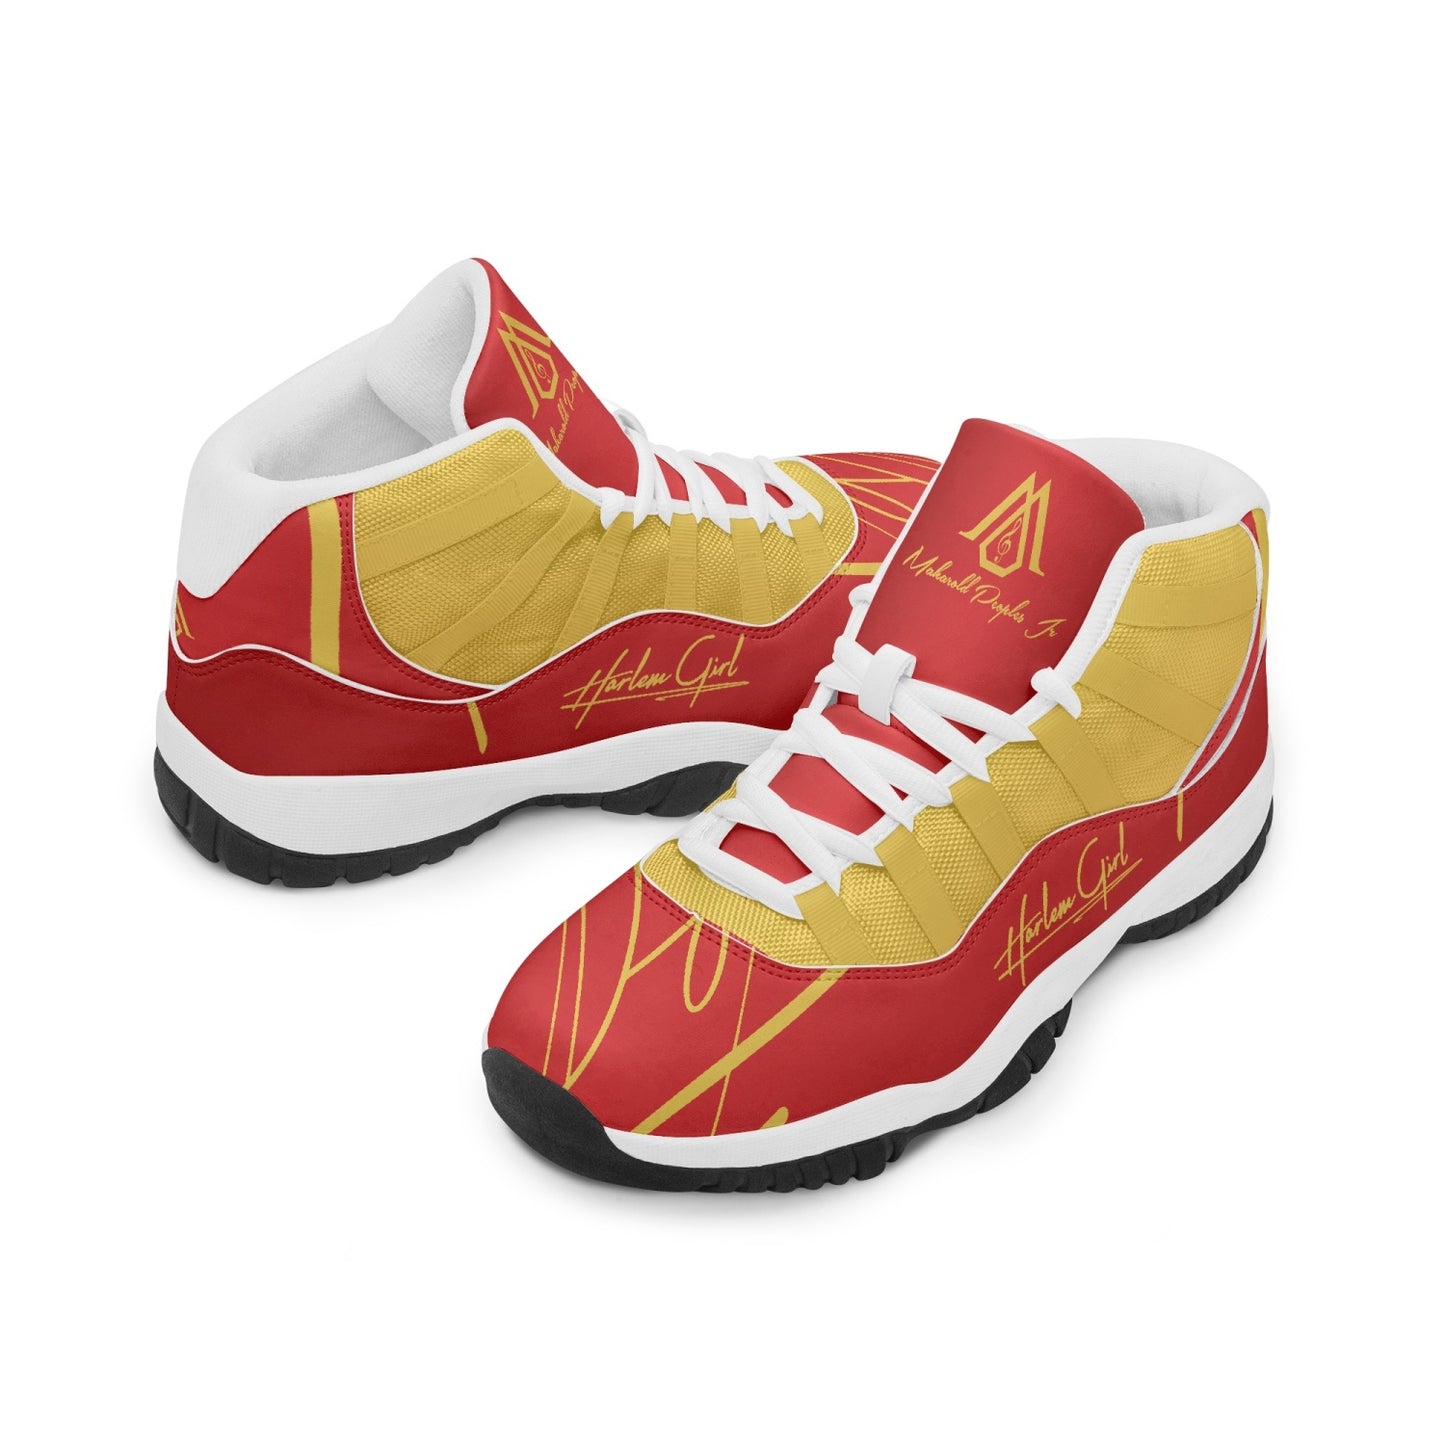 Harlem Girl "Tribe" Basketball MP2 Edition - Red w/Black or White Trim (Women's) *